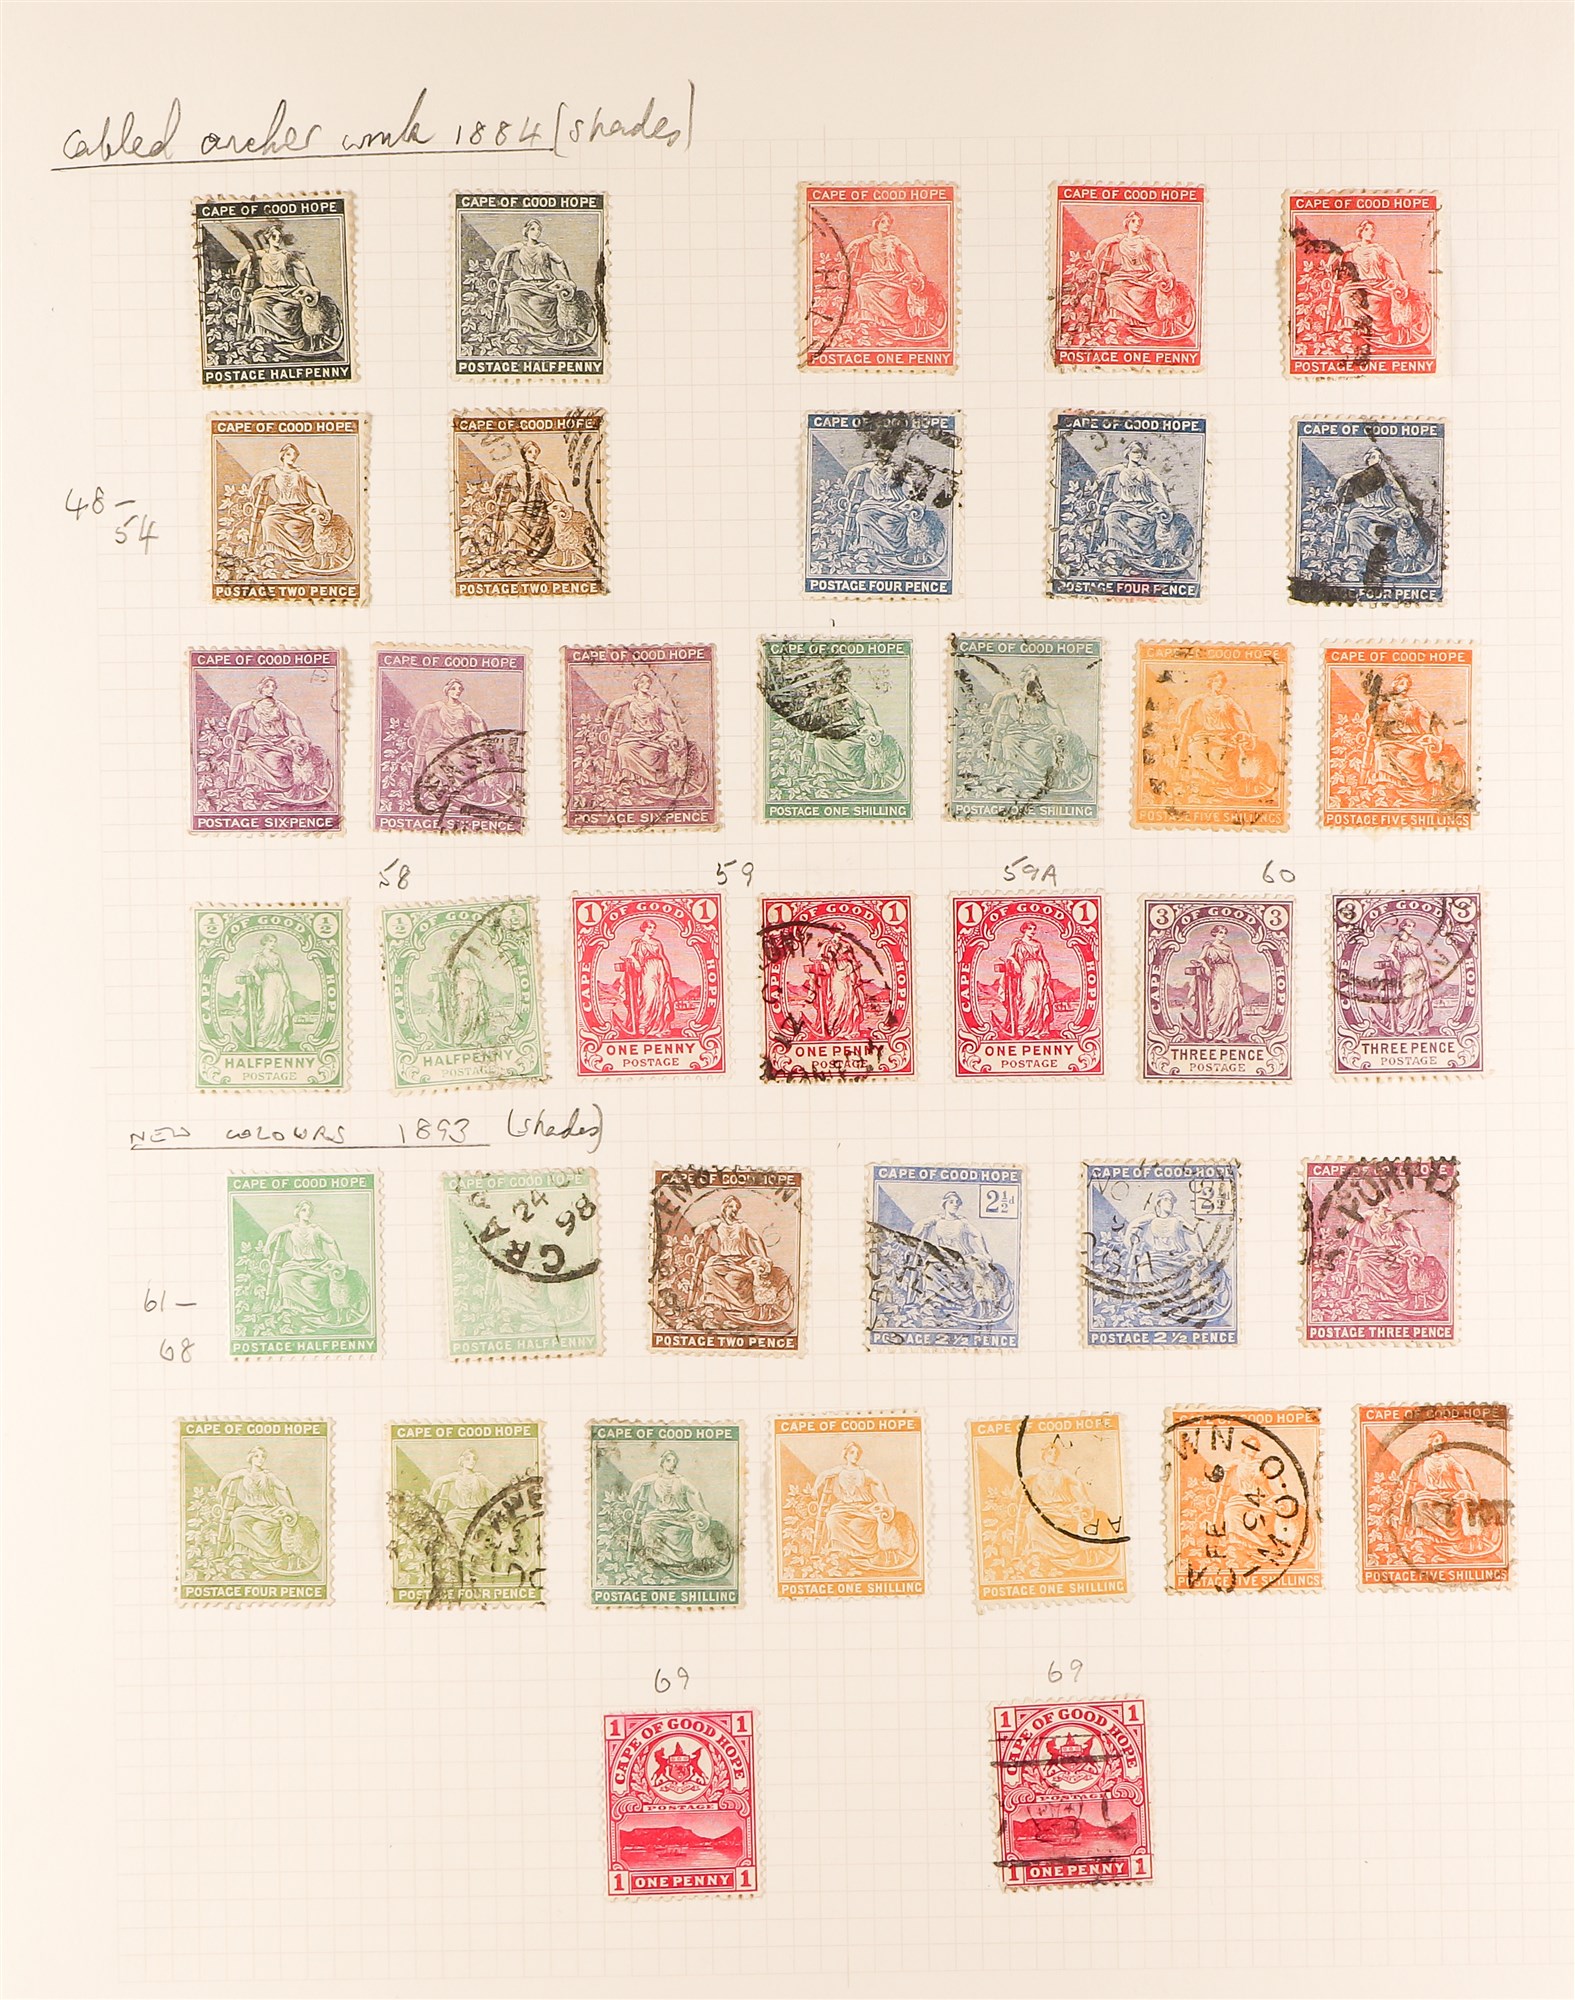 SOUTH AFRICA -COLS & REPS CAPE OF GOOD HOPE 1853 - 1902 COLLECTION of around 150 chiefly used stamps - Image 4 of 5